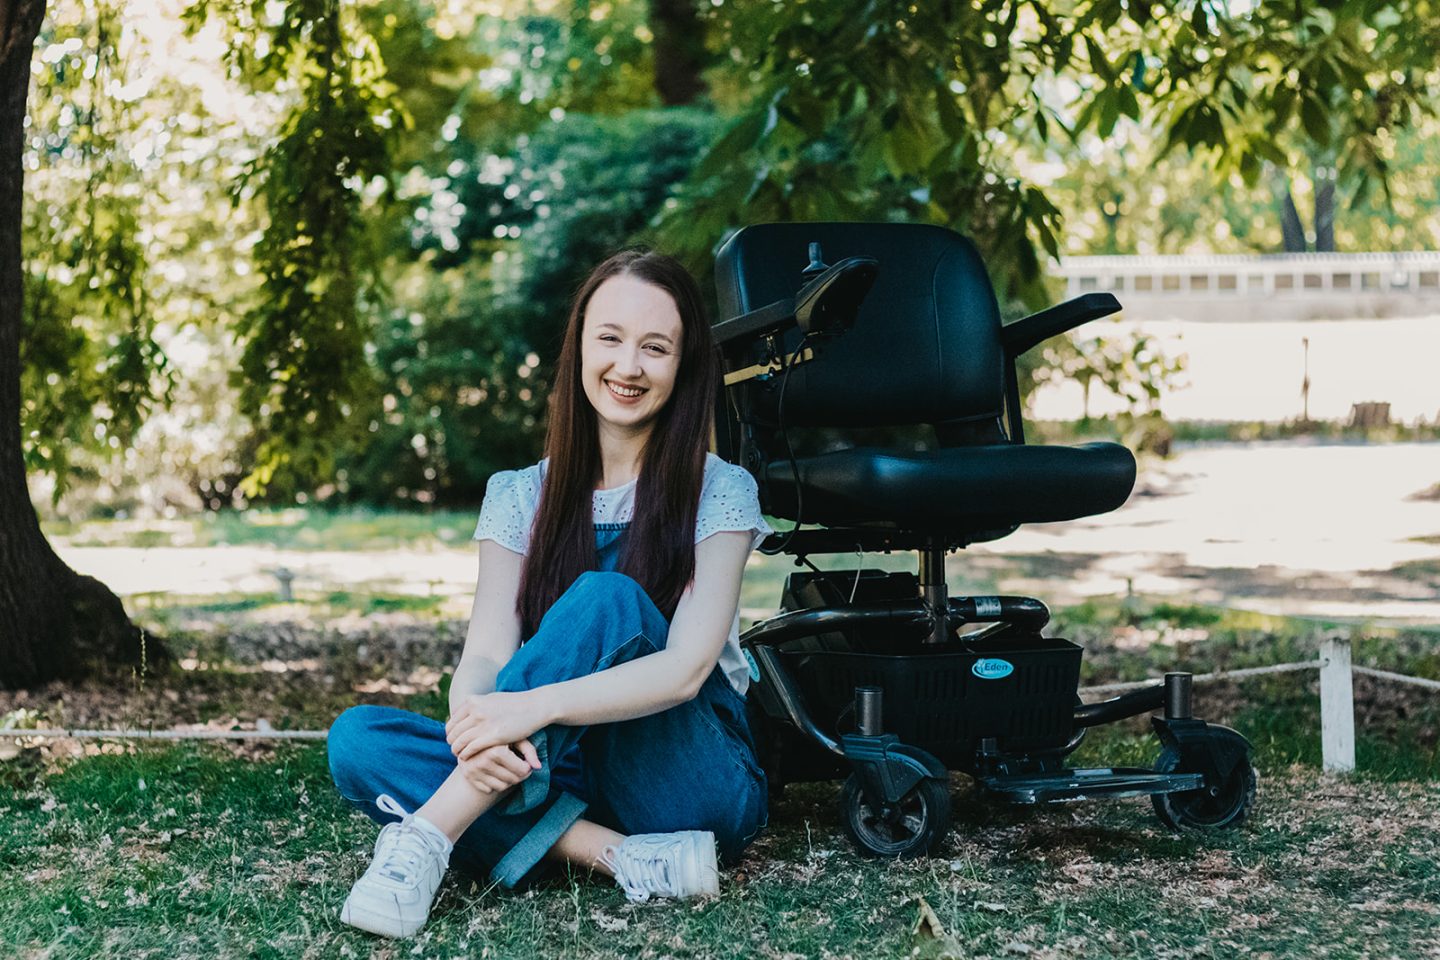 Pippa sat on the ground outdoors with her legs crossed, in front of her small black powerchair, to represent mobility aids. Pippa is smiling with her arms wrapped around her legs, wearing soft denim dungarees with a white frilly t-shirt and her long brown hair down.